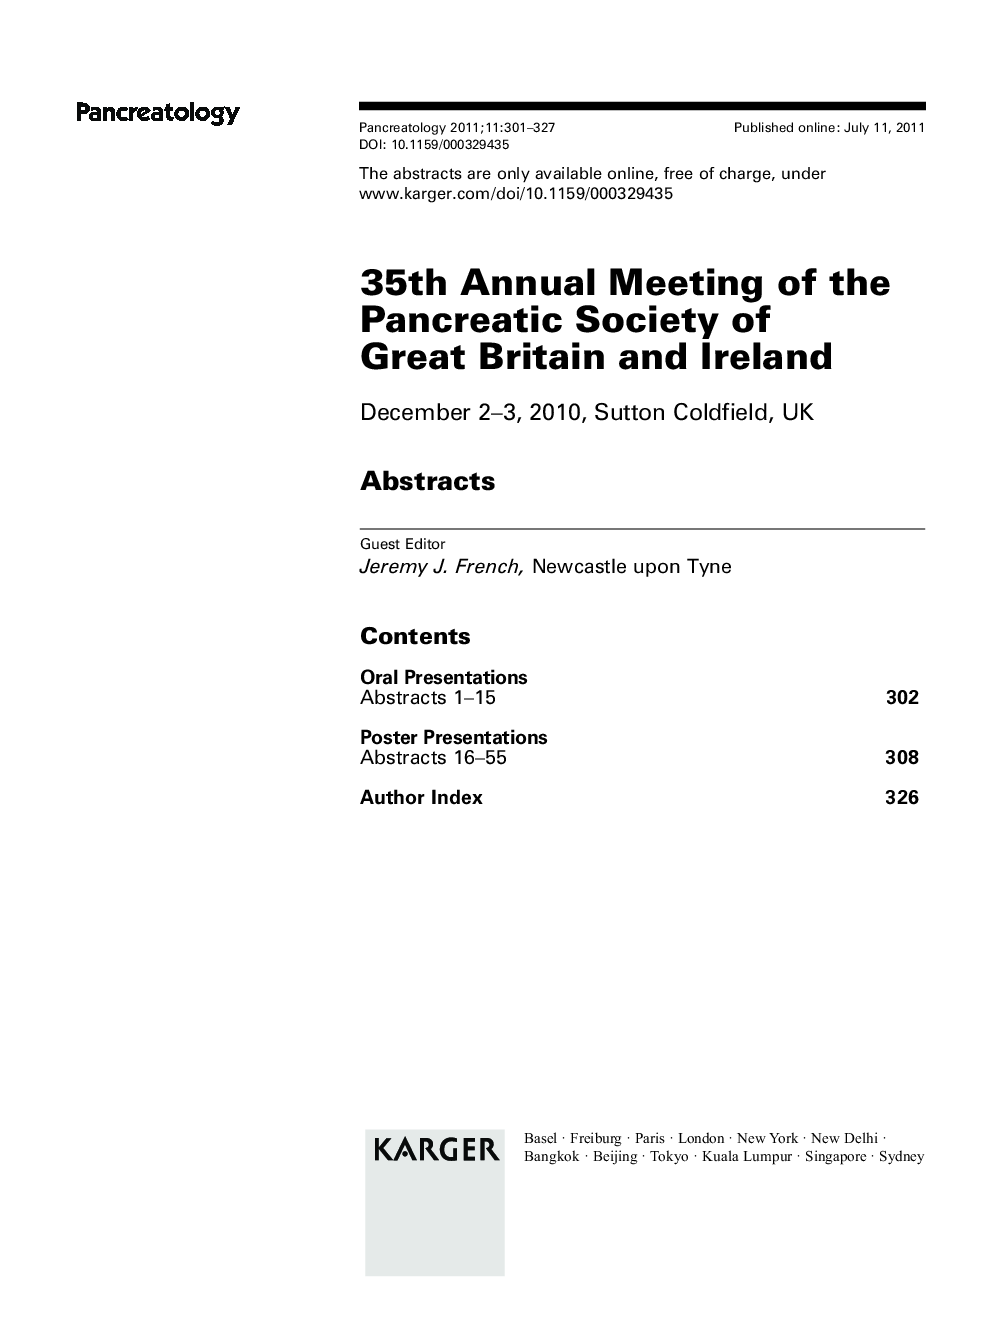 35th Annual Meeting of the Pancreatic Society of Great Britain and Ireland December 2-3, 2010, Sutton Coldfield, UK